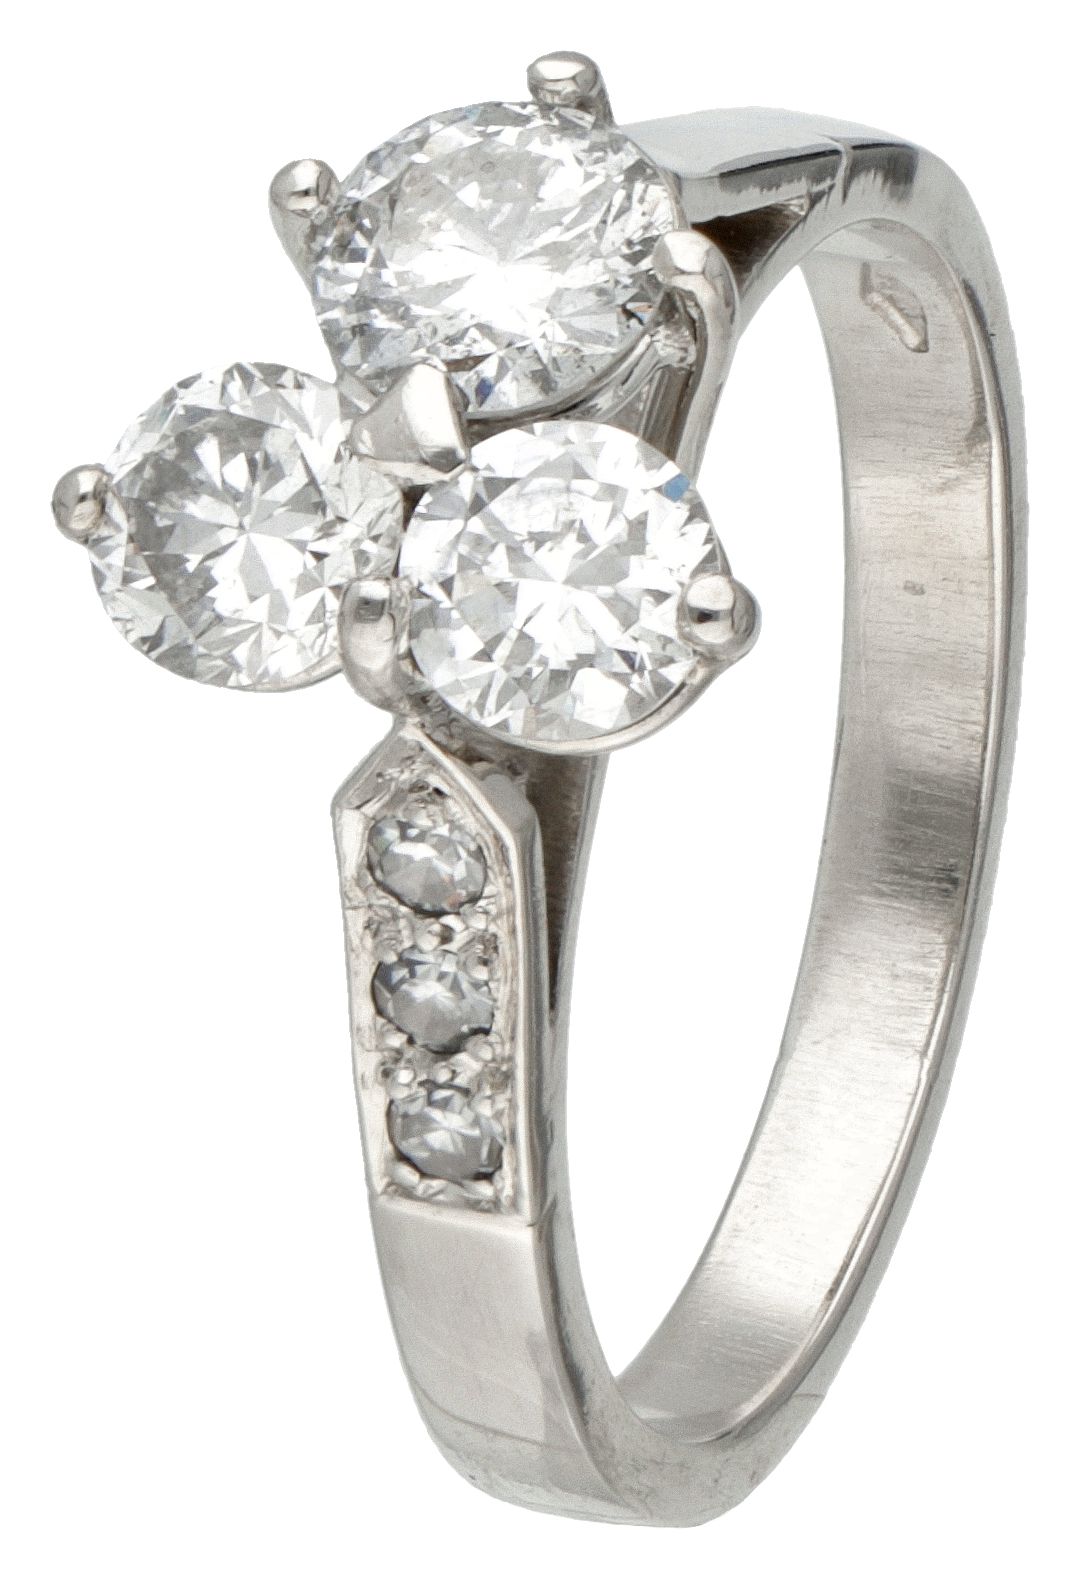 BLA 10K. White gold four-leaf clover ring set with approx. 1.00 ct. Diamond. Mit&hellip;